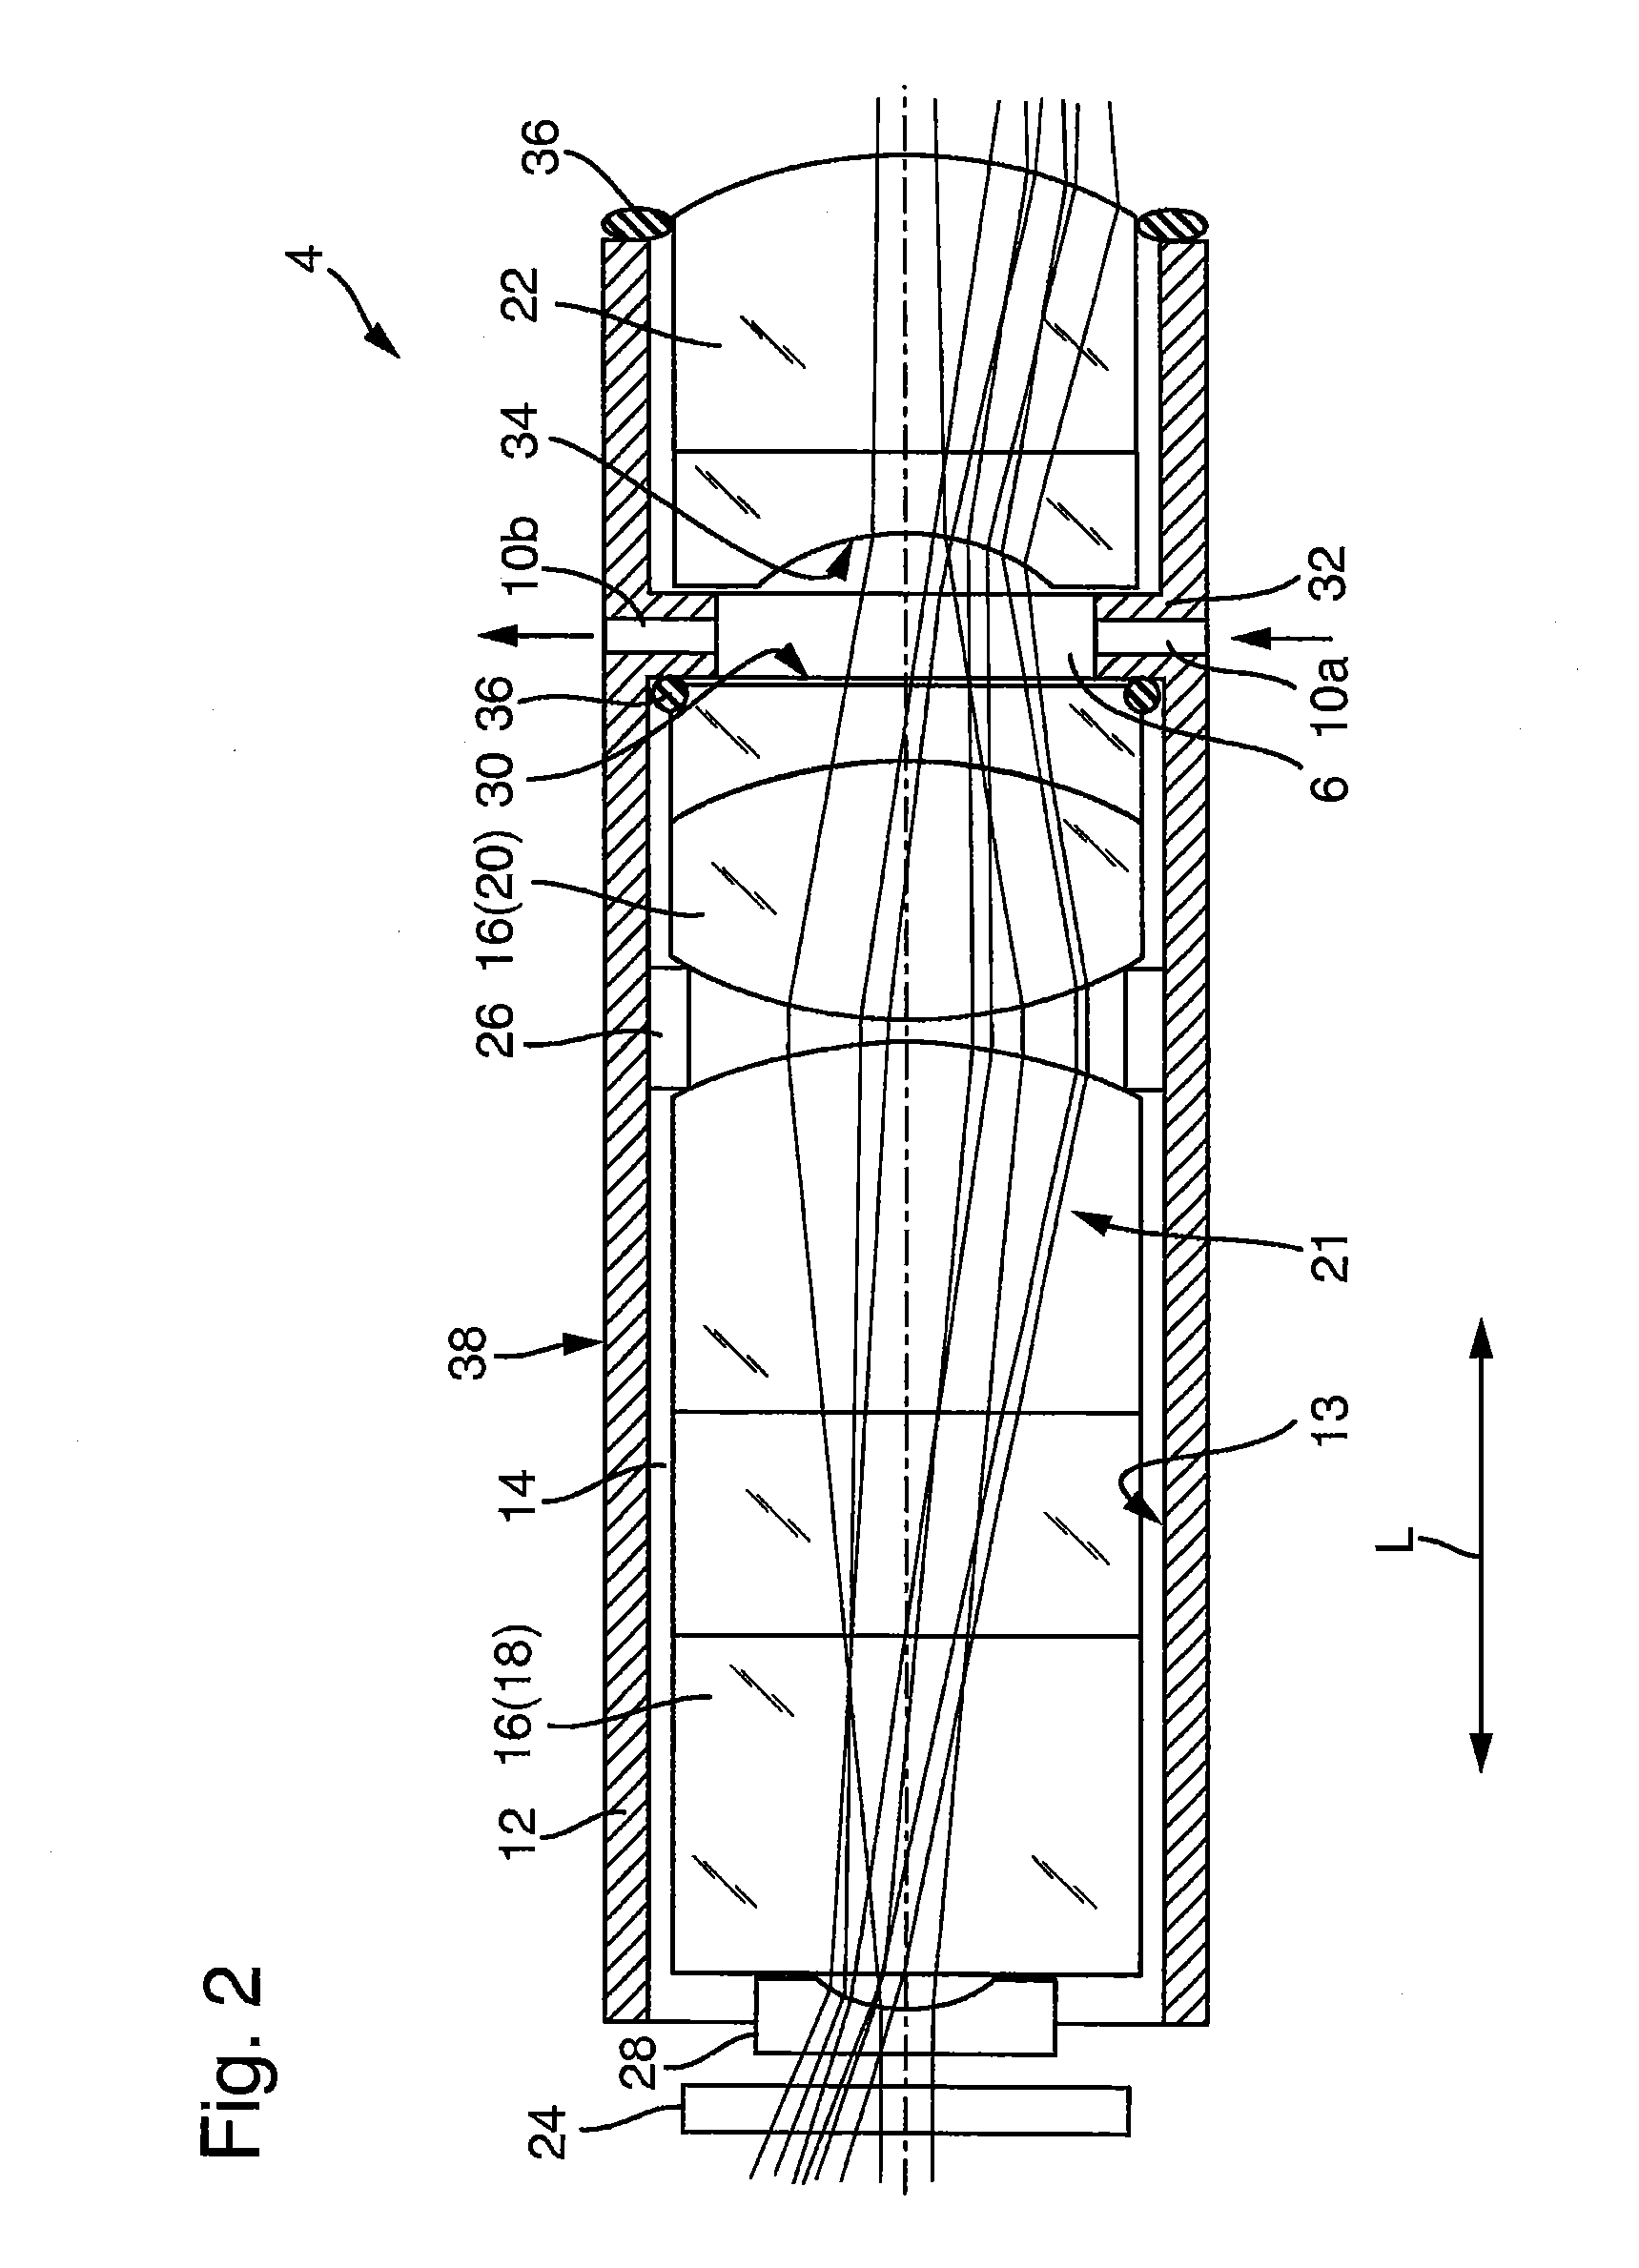 Endoscope objective, method for cleaning an endoscope objective and for repairing an endoscope